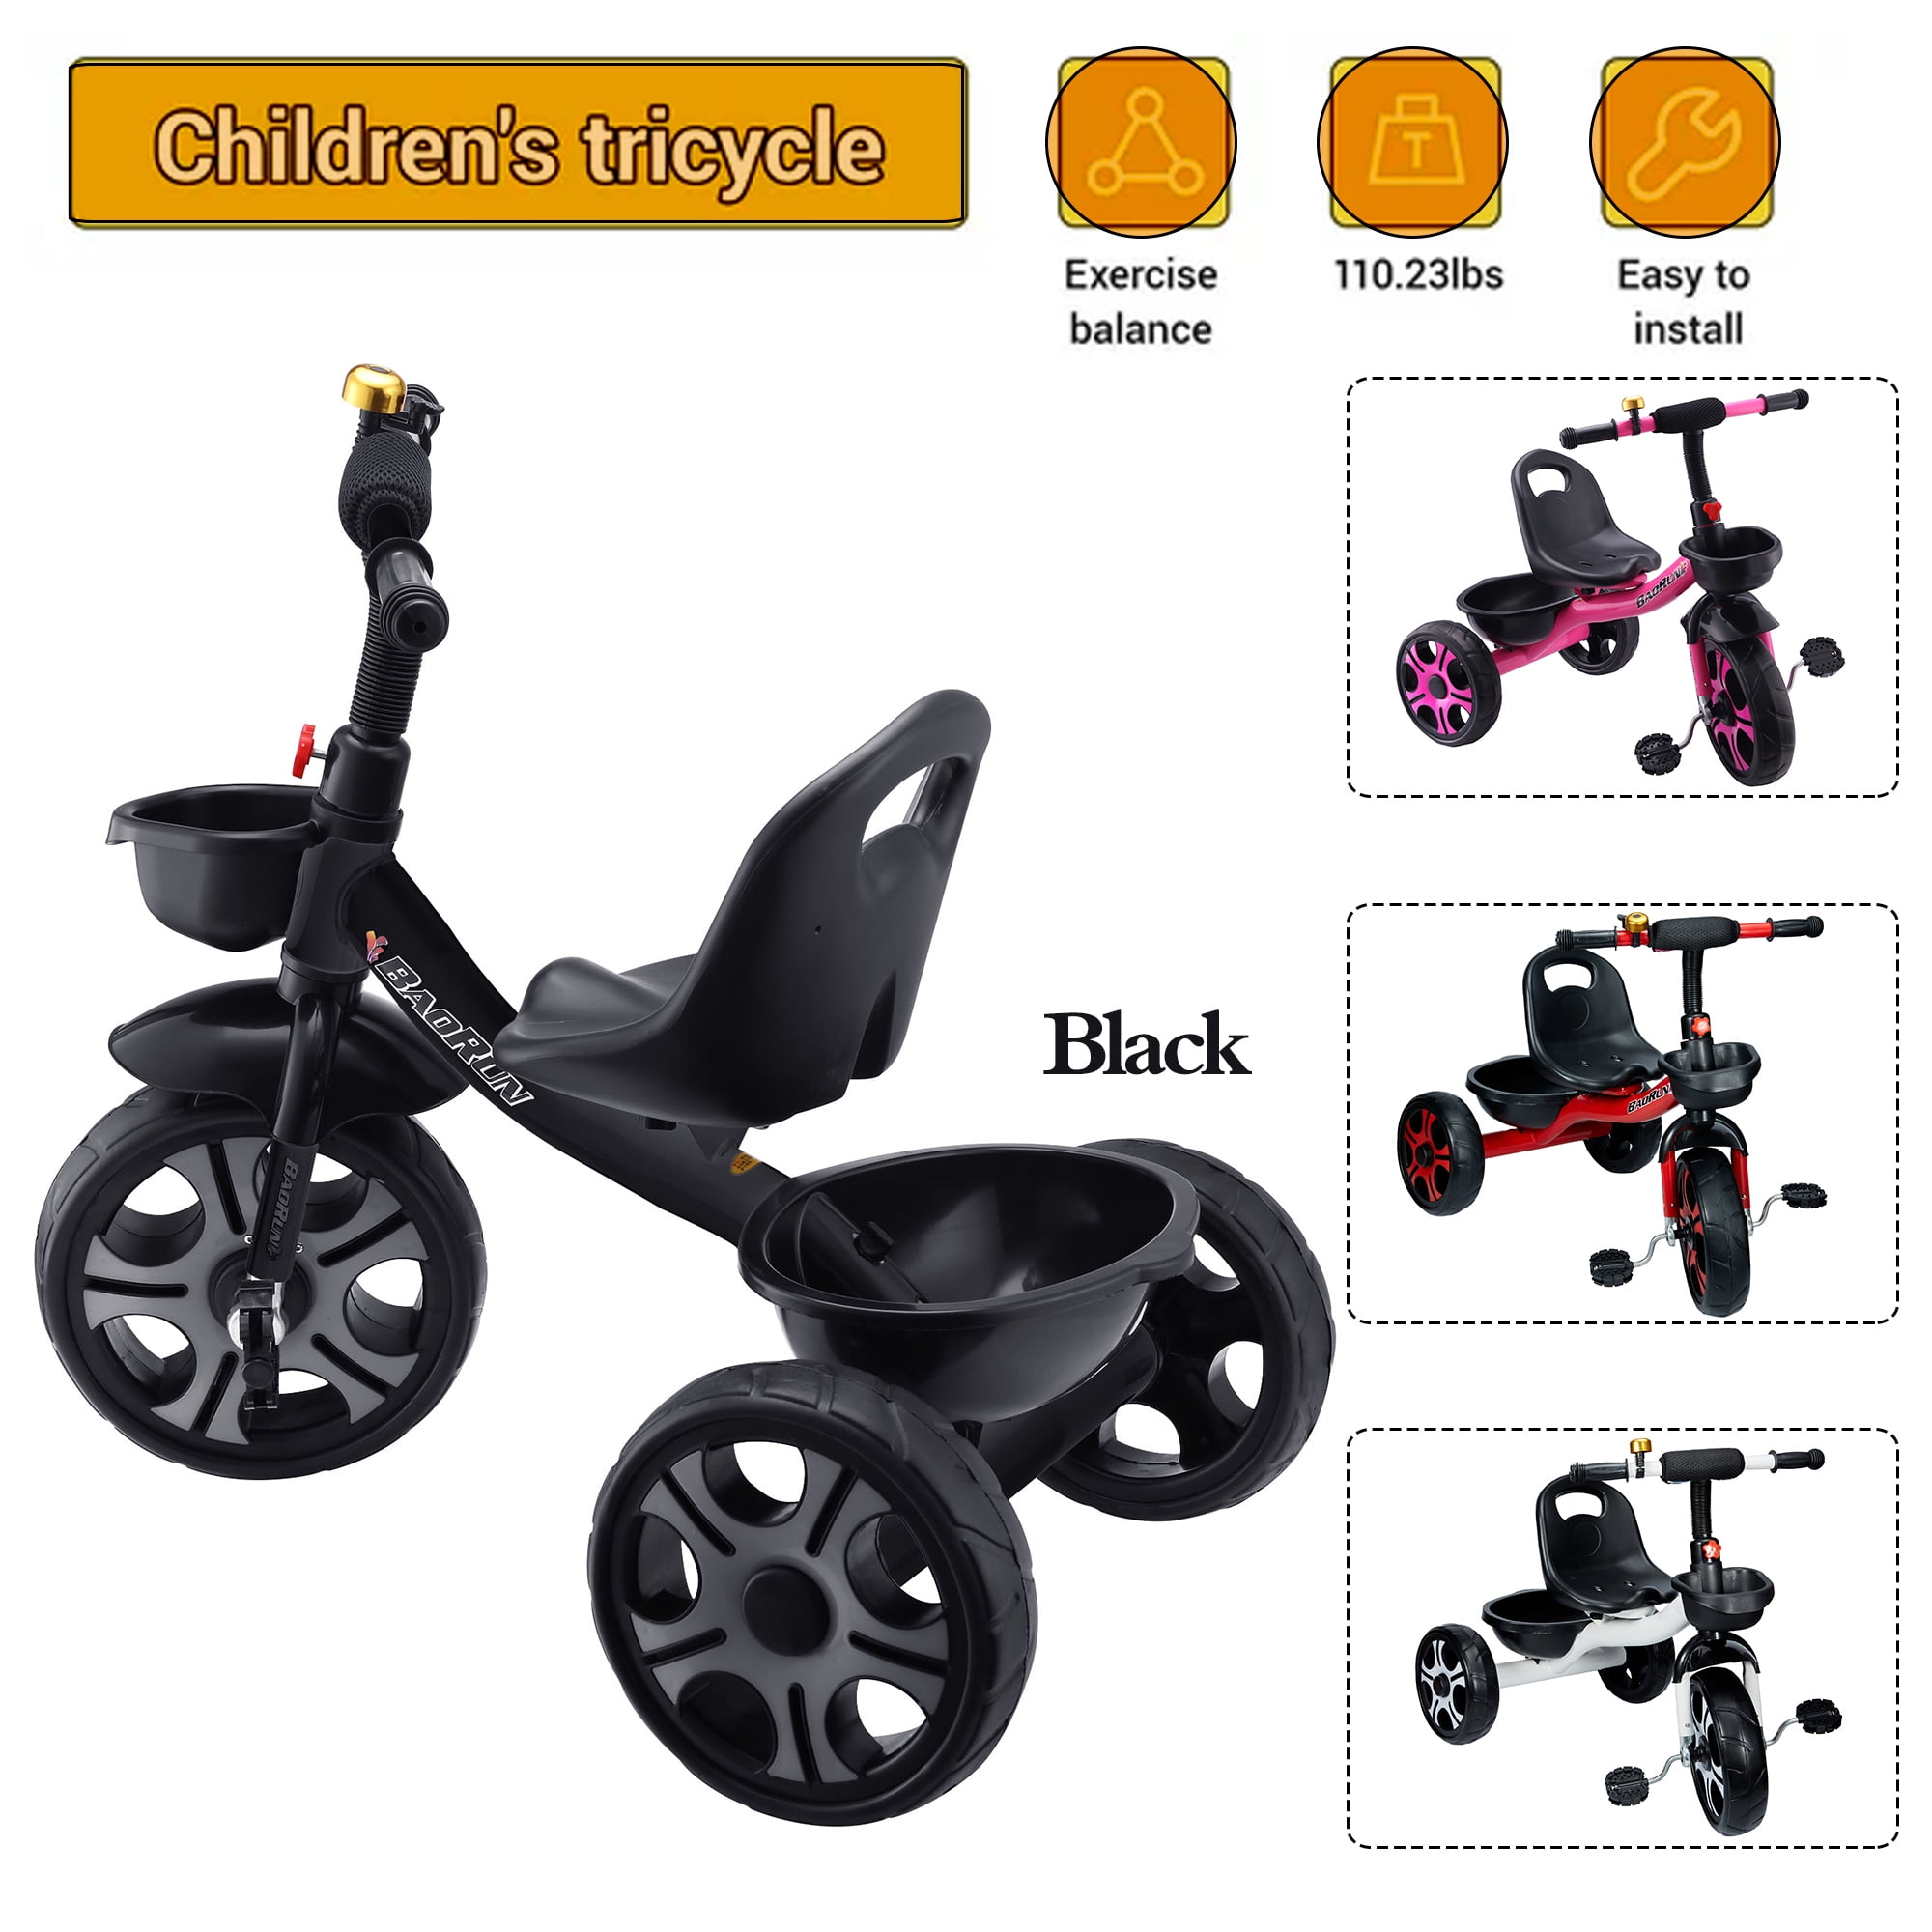 LELINTA Tricycle Balance Bike for 18 Months to 4 Years Old Boy Girl, 3 Wheel Balance Bicycle Beginner Bike Child Trike with 2 Storage Baskets on Front & Back & Non-Slip Handlebar